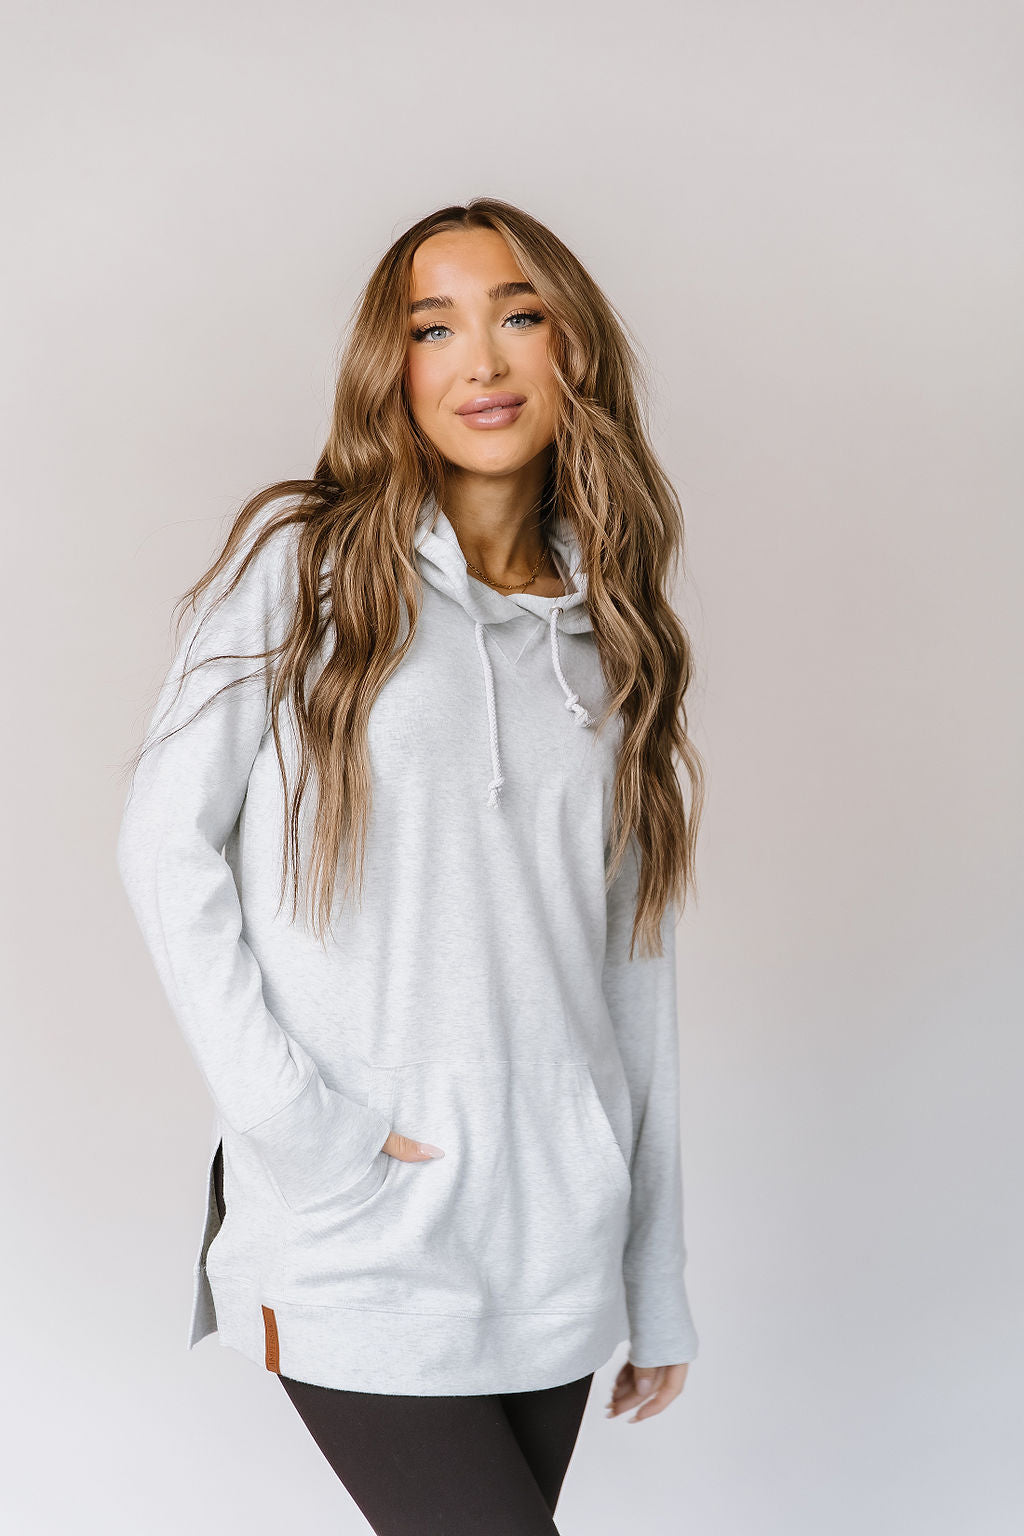 ONLINE ONLY! Sideslit Hoodie - White Mist